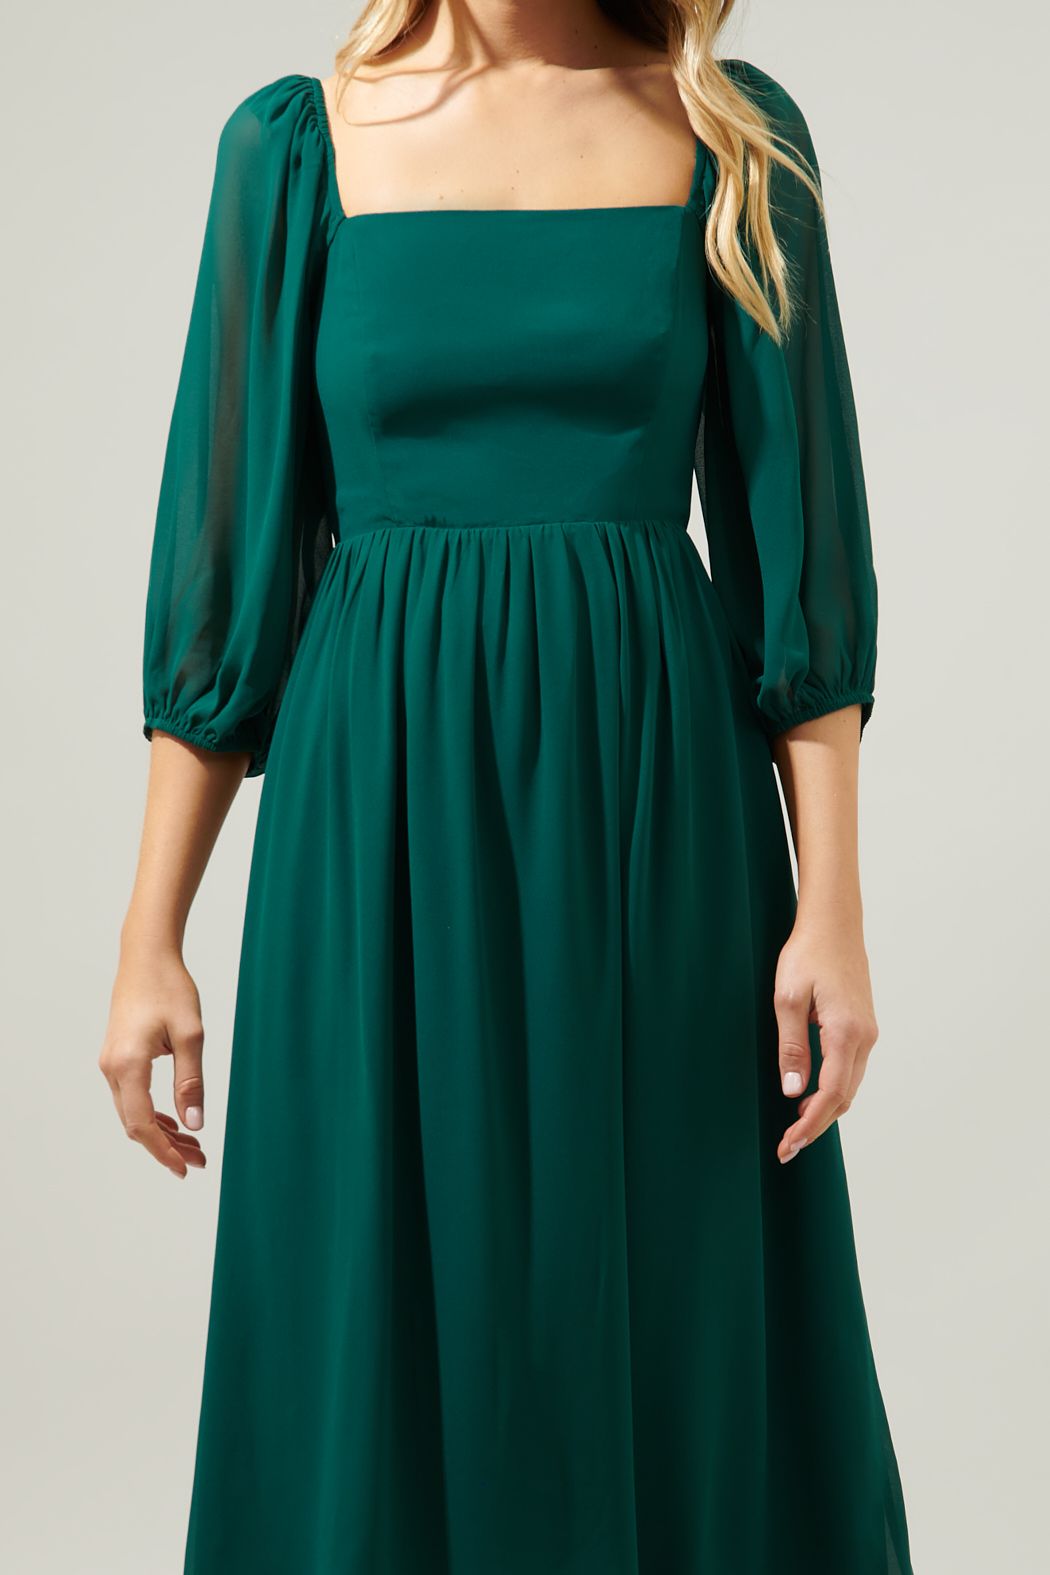 Emerald Midi Dress - Out of the Blue